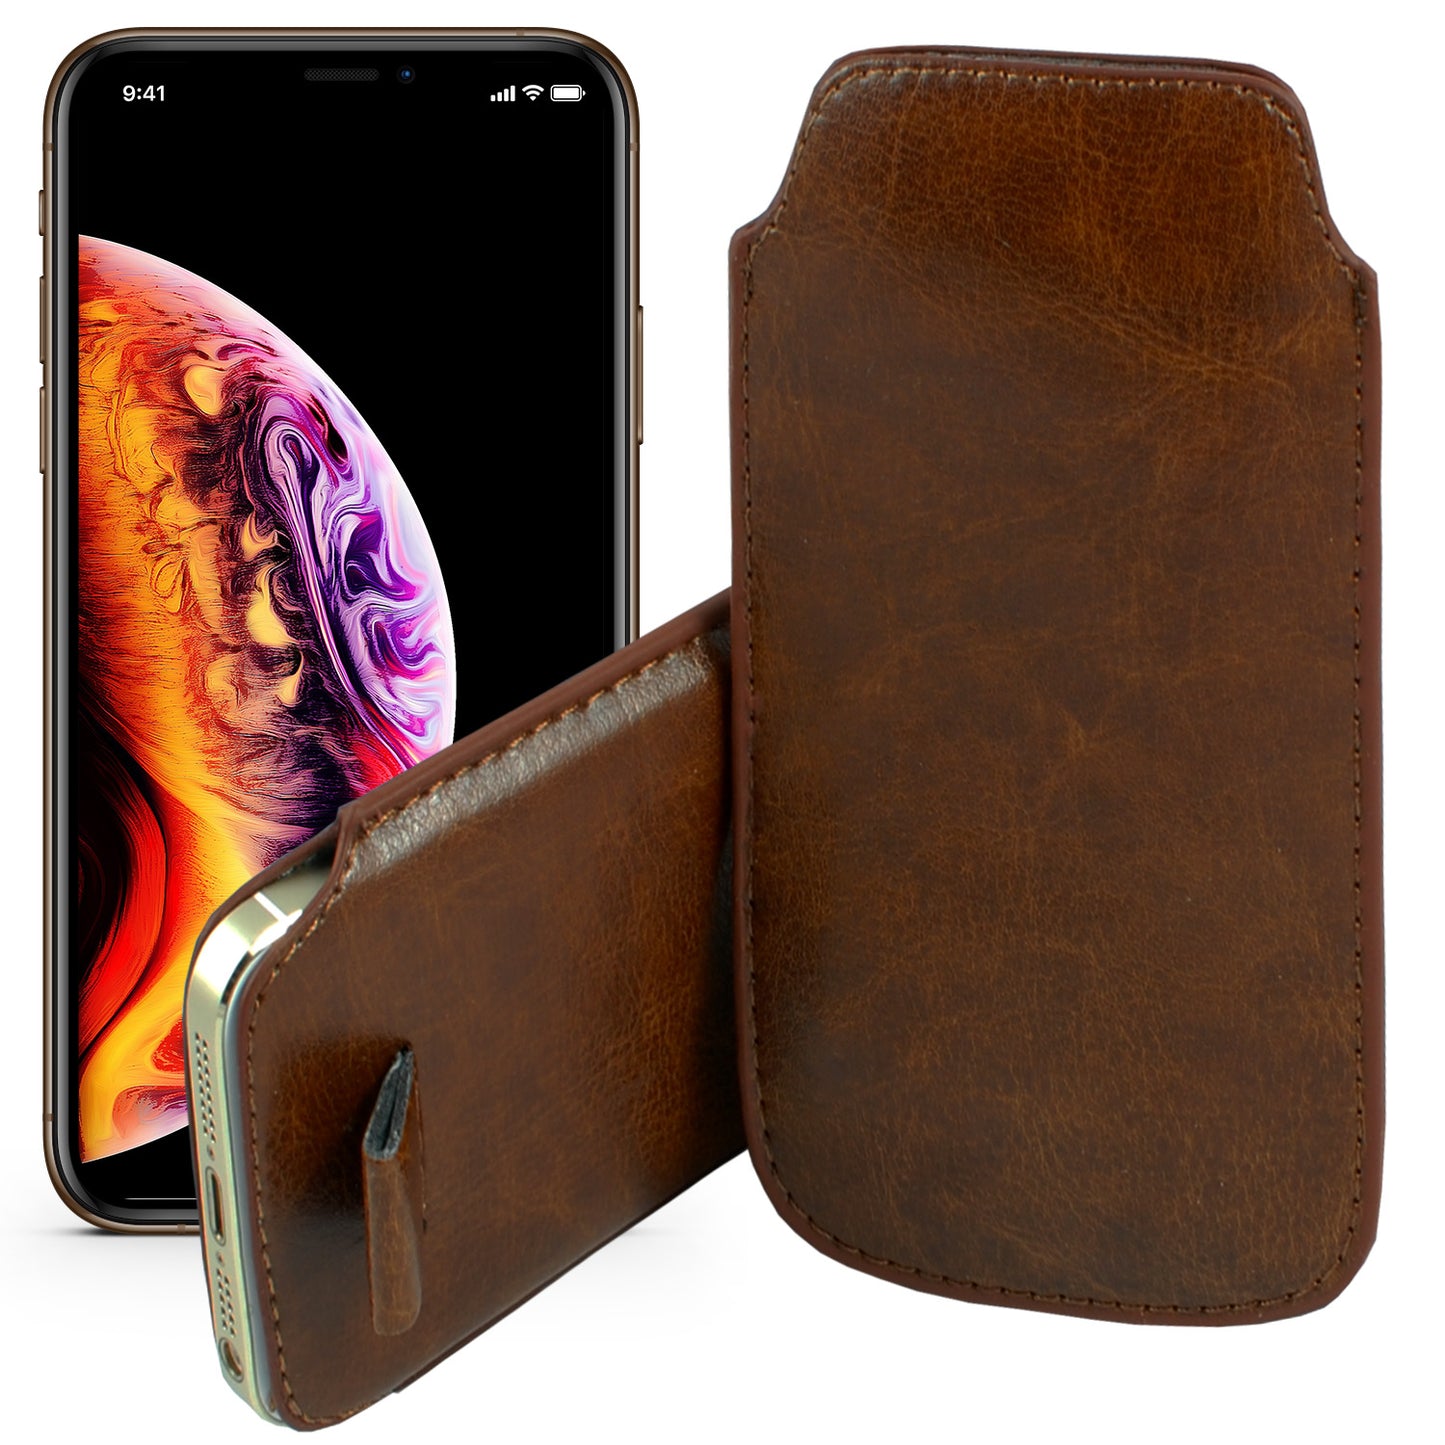 MEZON Apple iPhone 8 Plus (5.5") Brown Pull Tab Slim Faux Leather Pouch Sleeve Case Wireless Charging Compatible